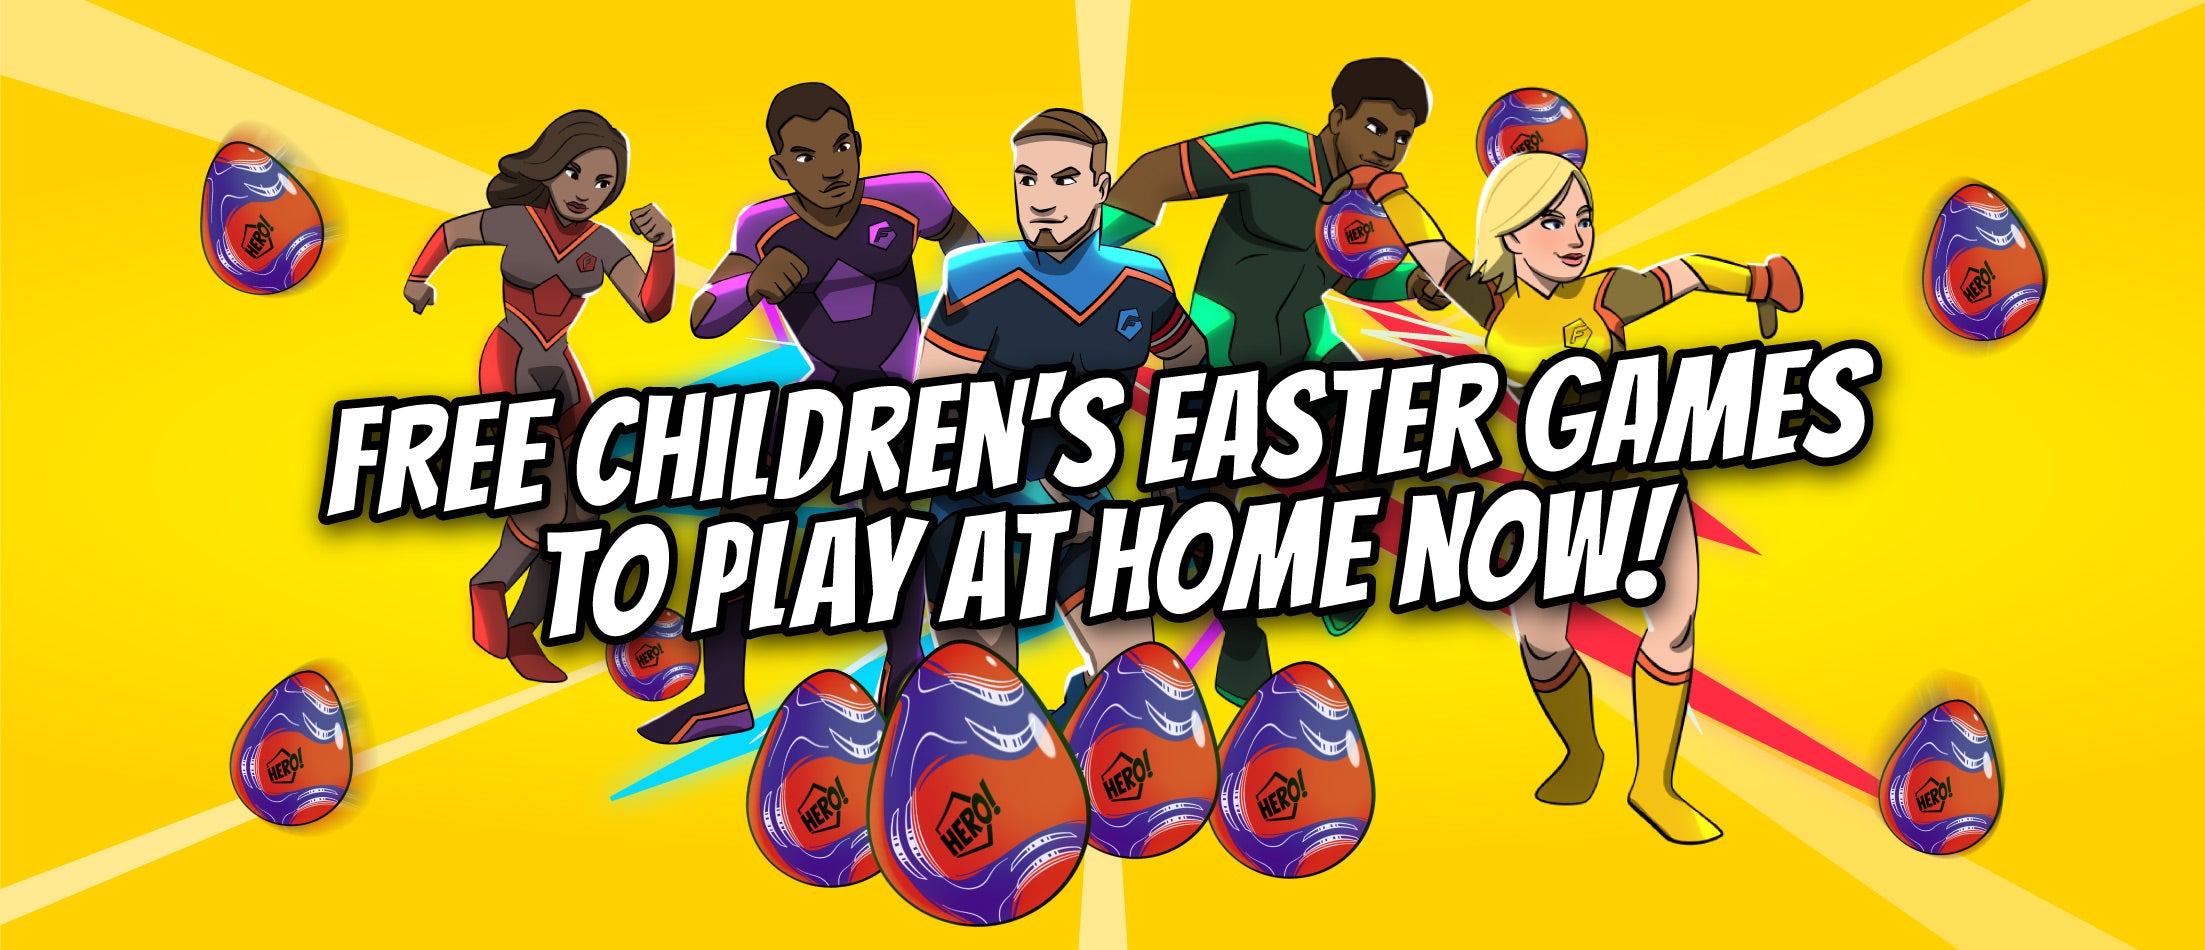 FREE Children's Football Easter Games to play at home now!